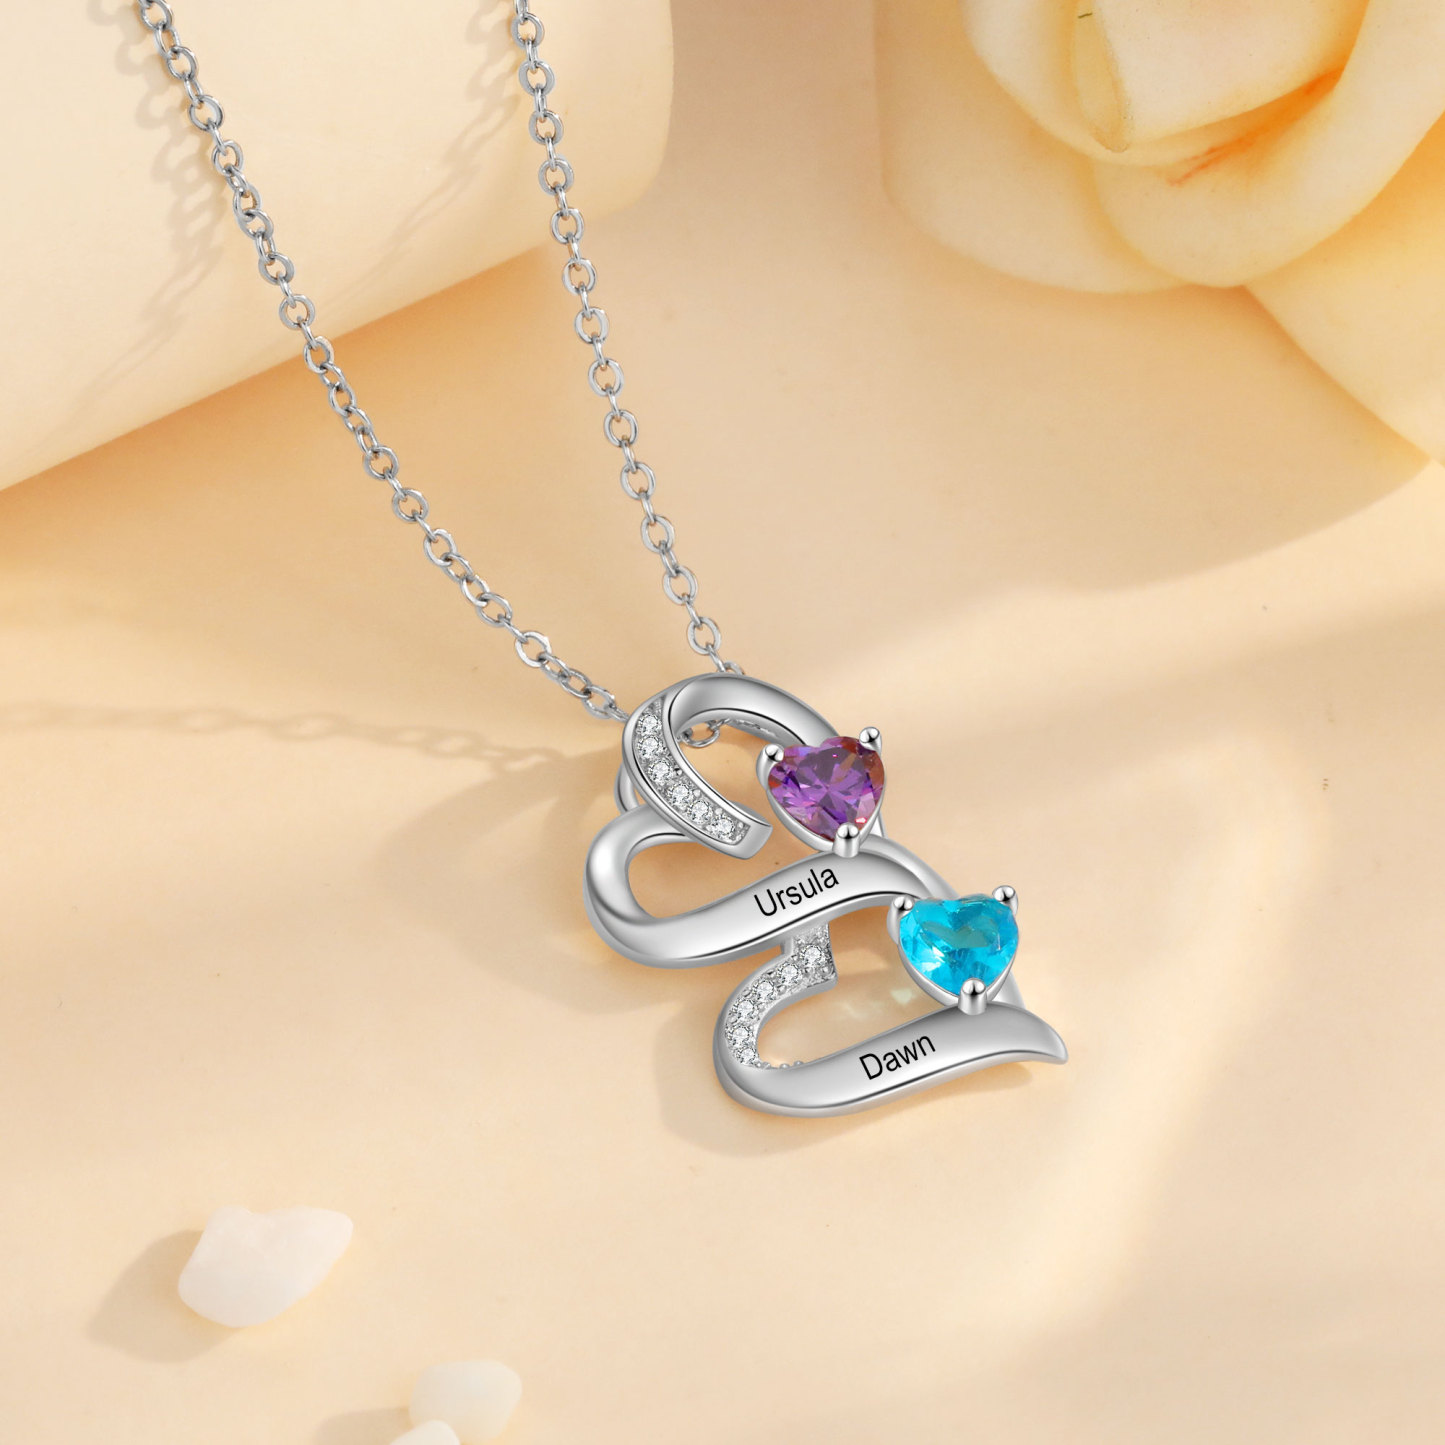 2 Names-Personalized Hearts Necklace Custom Birthstone Necklace Engraved Names Special Gifts for Her